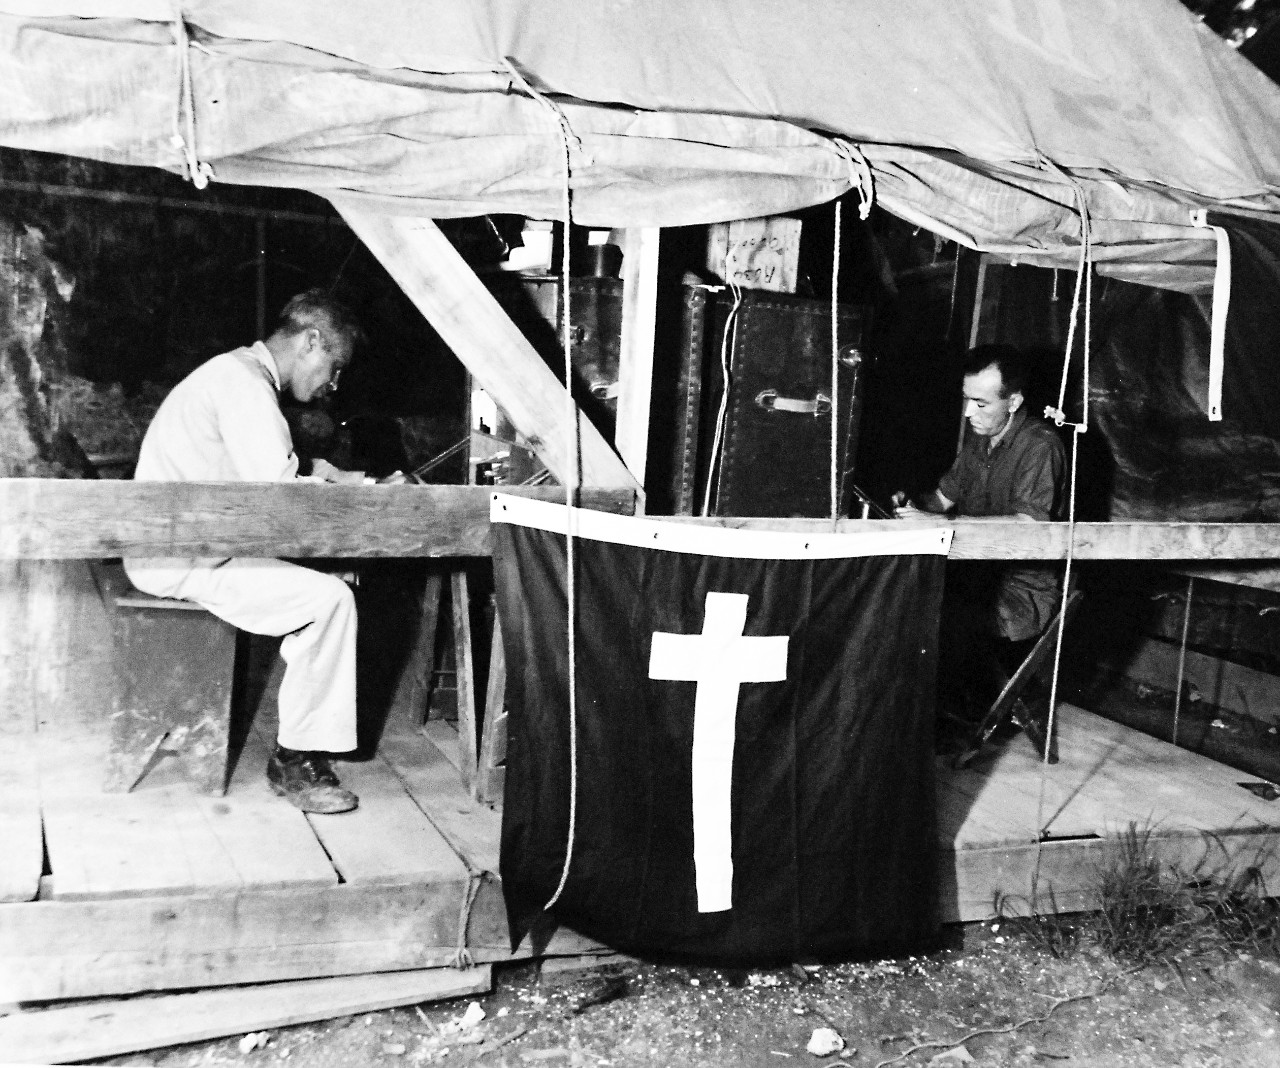 80-G-347081:  Okinawa, Ryukyus Islands  Chaplains, October 1945.   Chaplains, Lieutenant Commander O.G. Grotefend (with pipe in mouth) and Warrant Officer Leo Margulies, shown writing at their desk at Okinawa, Ryukyu Island.    Photograph received October 5, 1945.    Official U.S. Navy photograph, now in the collections of the National Archives.  (2017/02/14).  